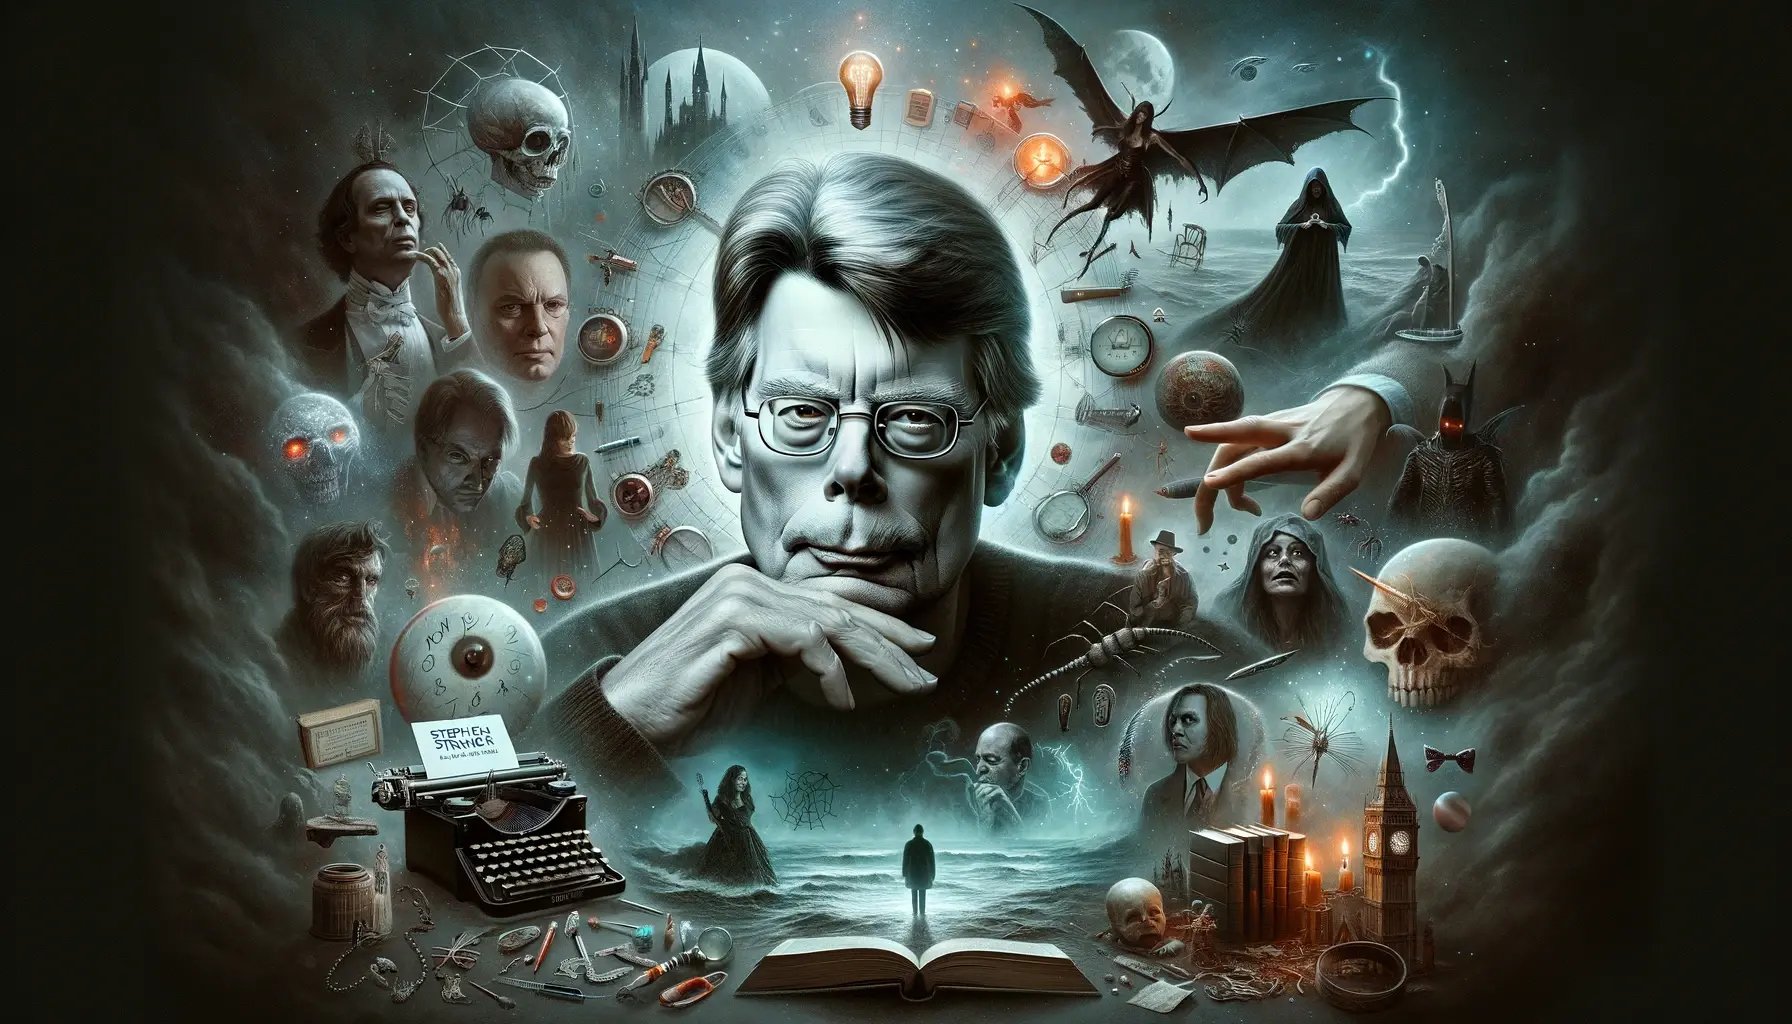 Stephen Kings MTP To awaken the imagination and confront the deepest fears of humanity through compelling and transformative storytelling